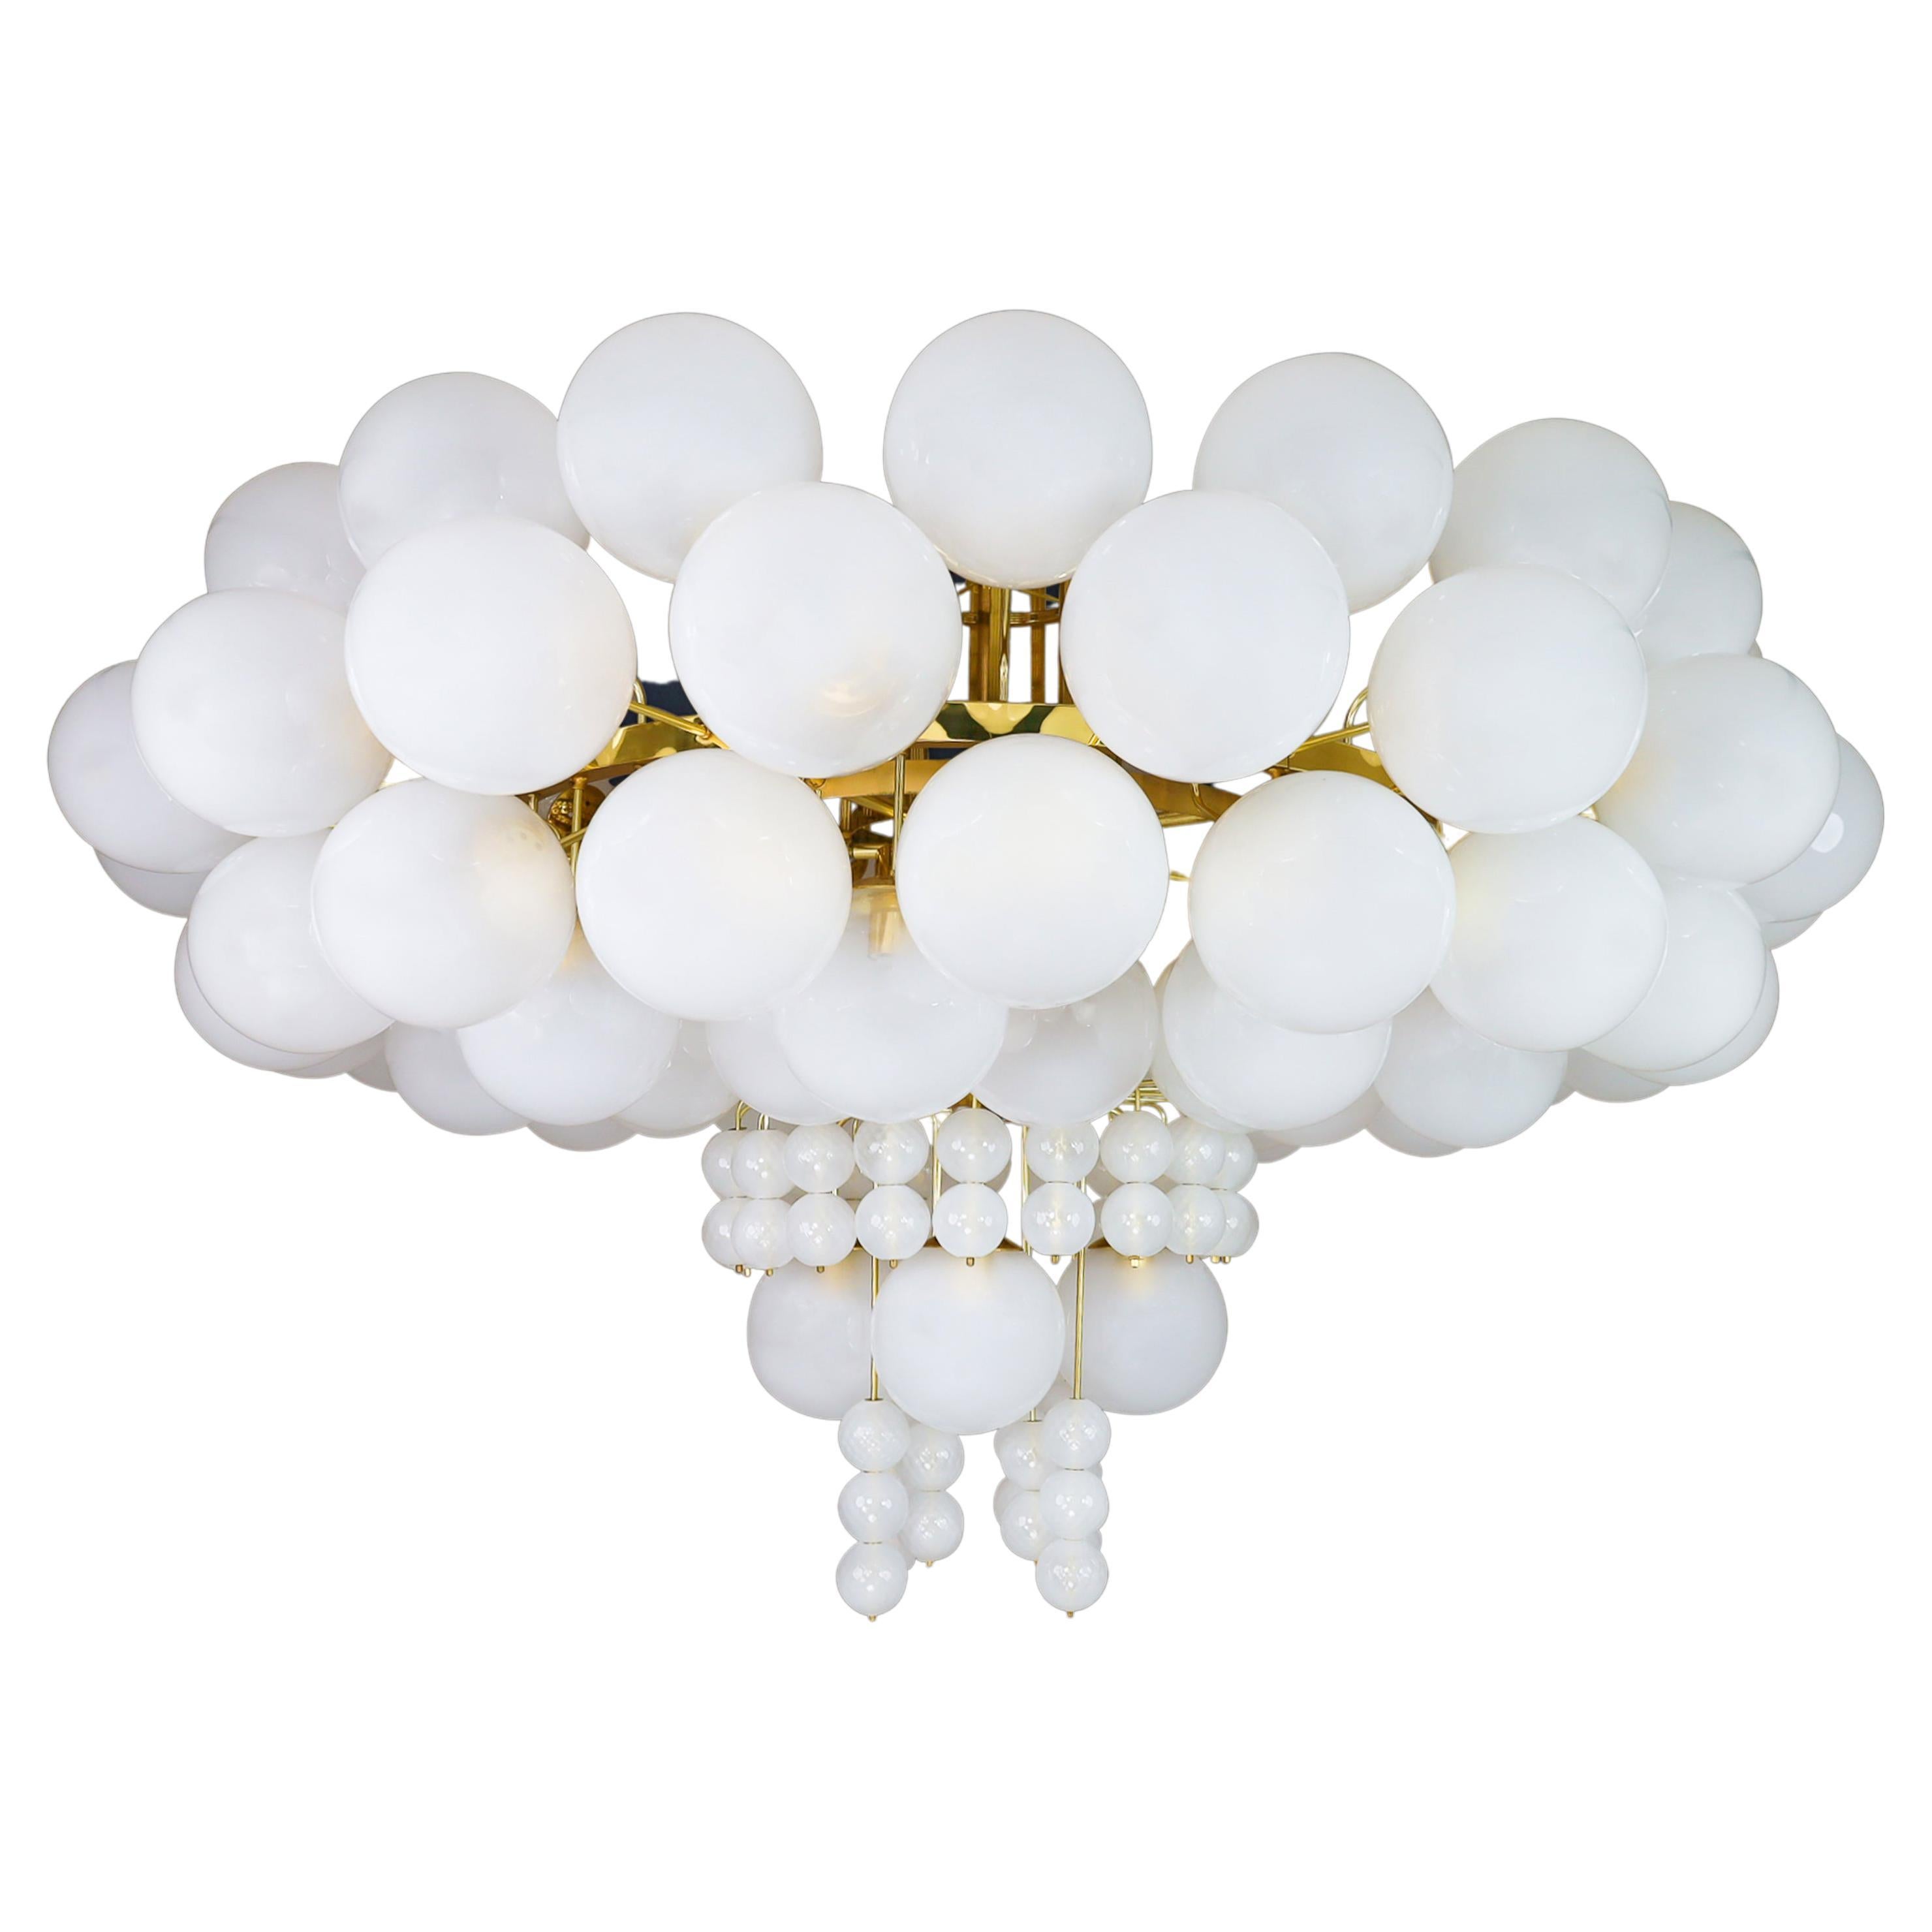 XXL Hotel Chandelier with Brass Fixture and Hand-Blowed Frosted Glass Globes For Sale